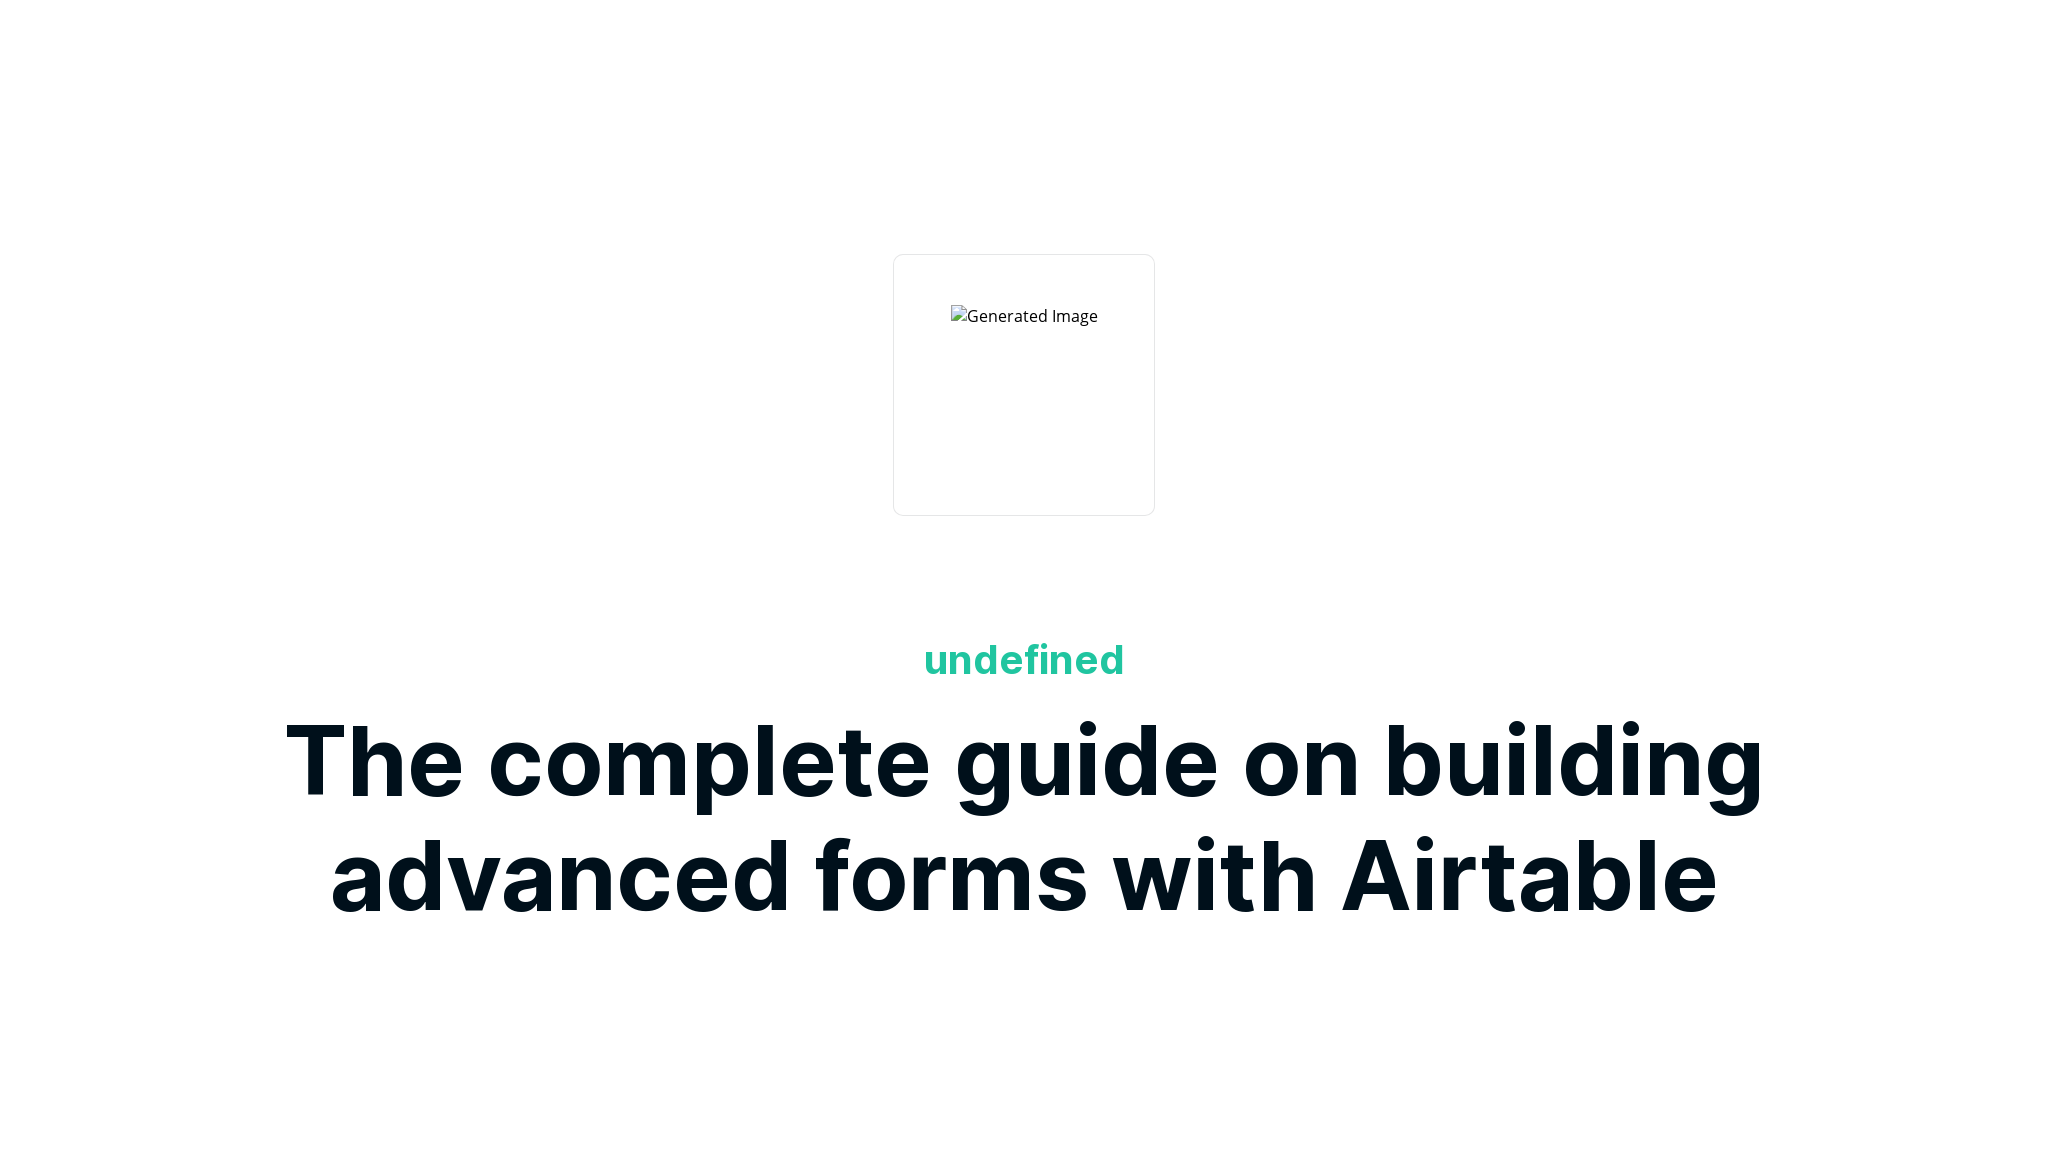 airtable form cover image size